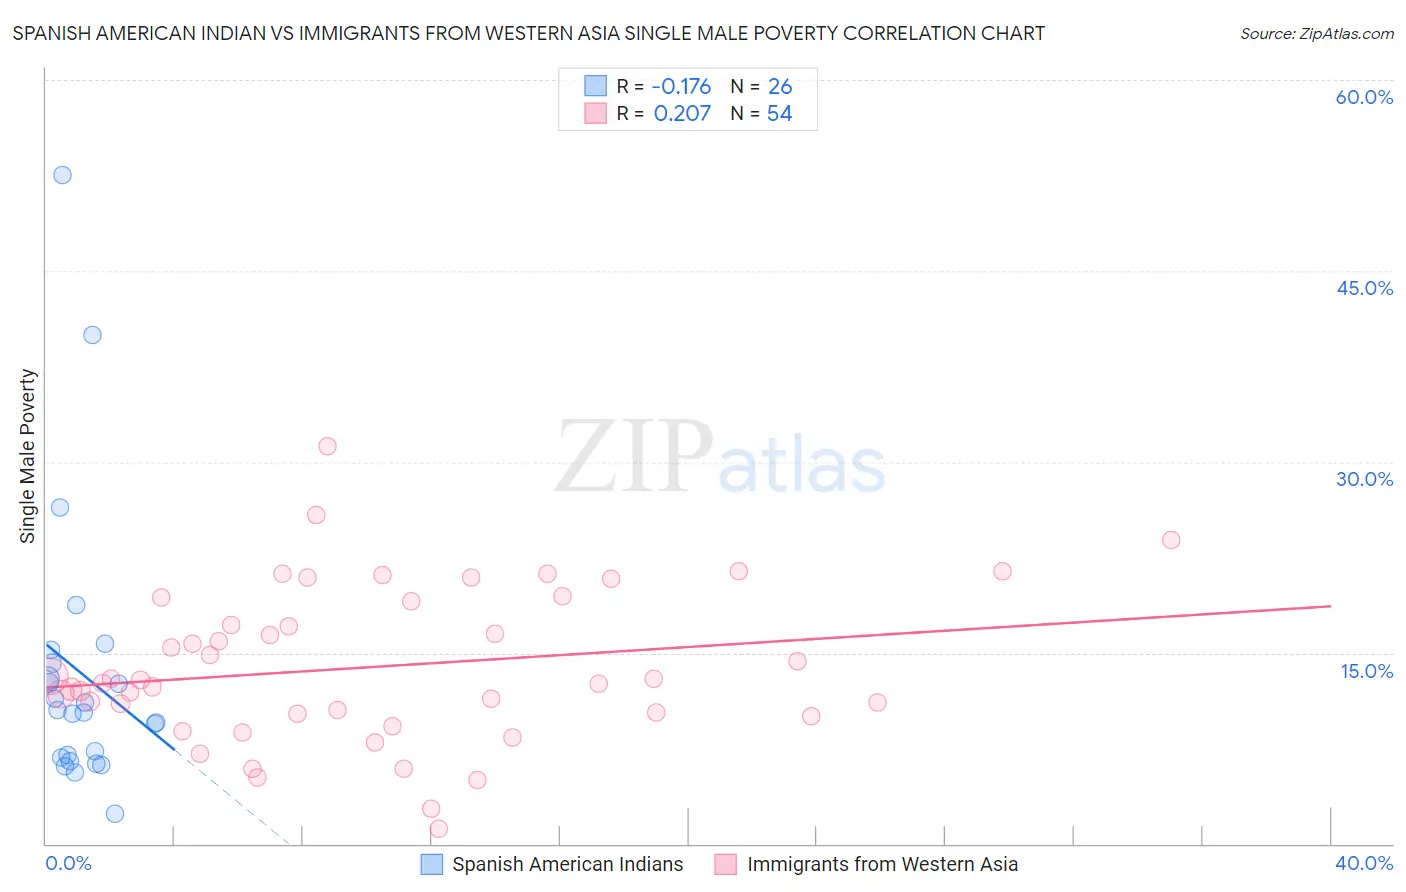 Spanish American Indian vs Immigrants from Western Asia Single Male Poverty